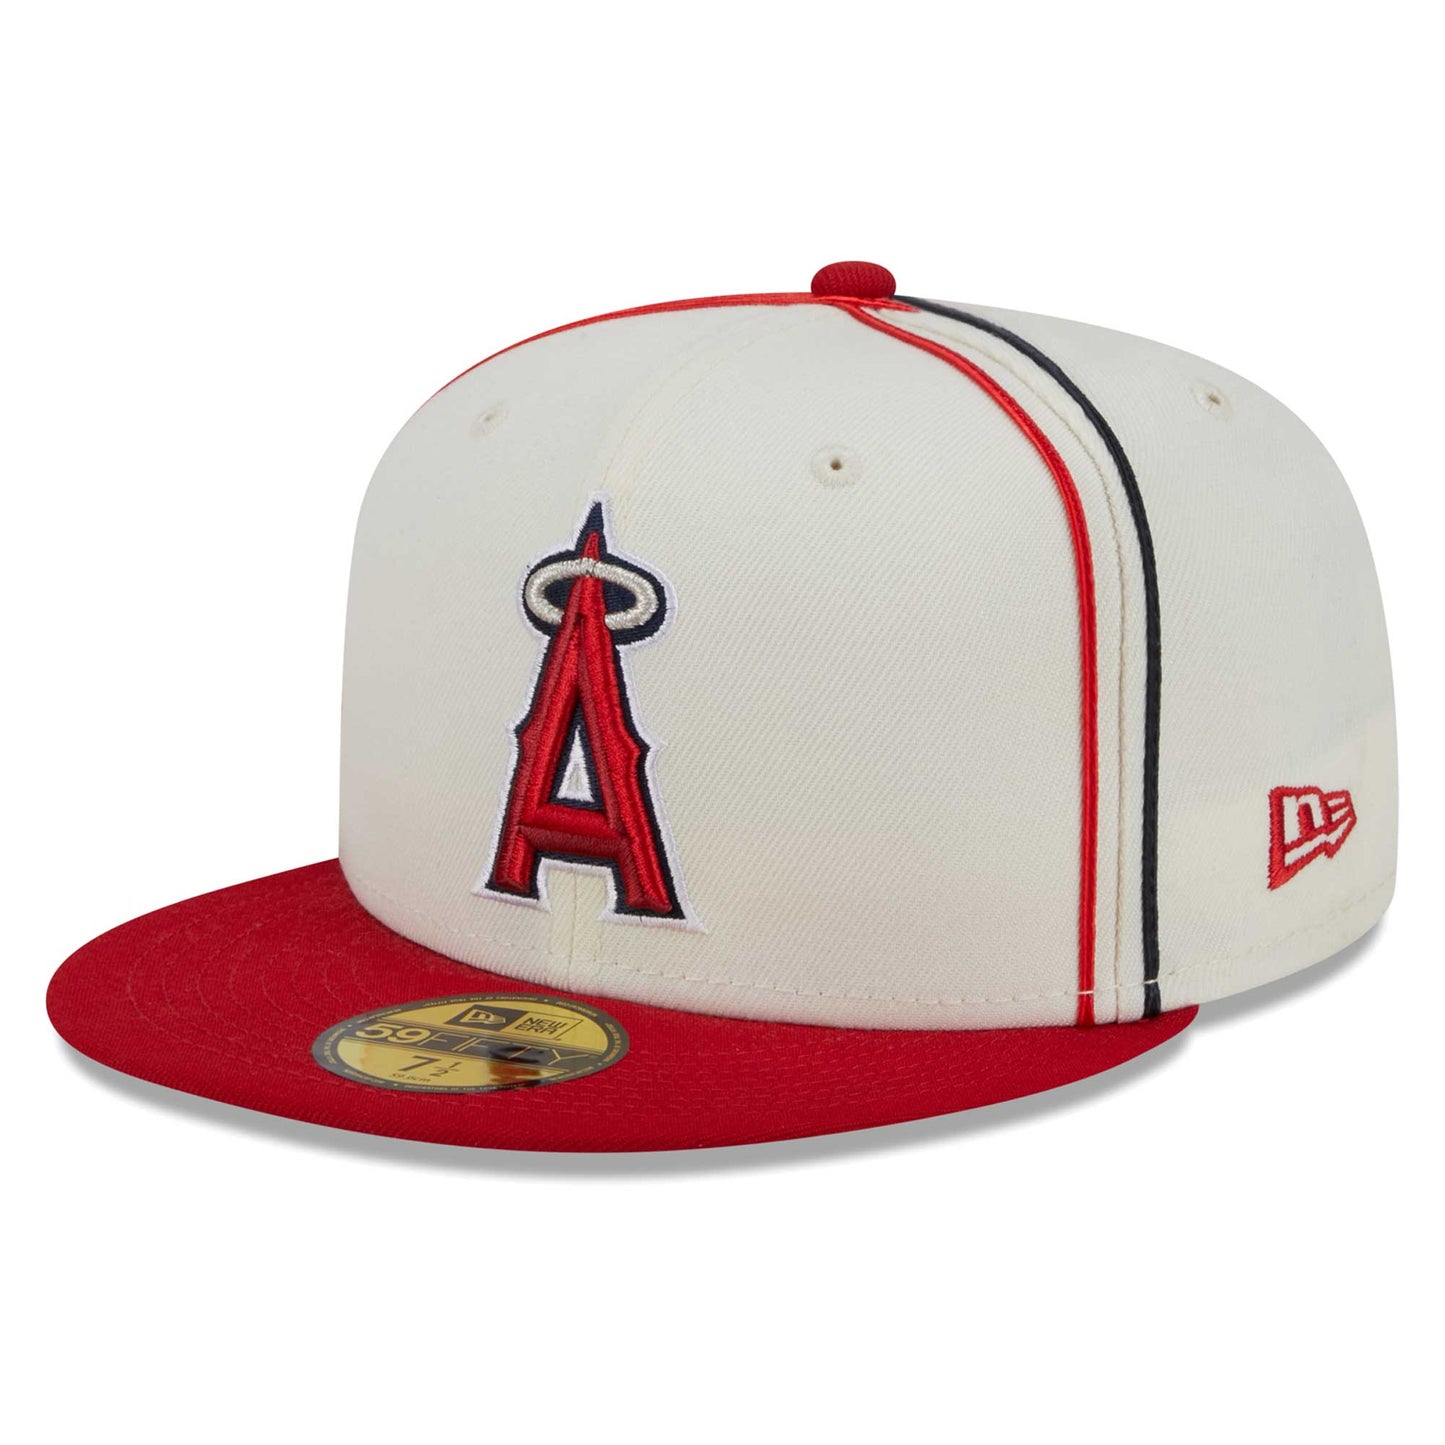 Los Angeles Angels New Era Chrome Sutash 59FIFTY Fitted Hat - Cream/Red